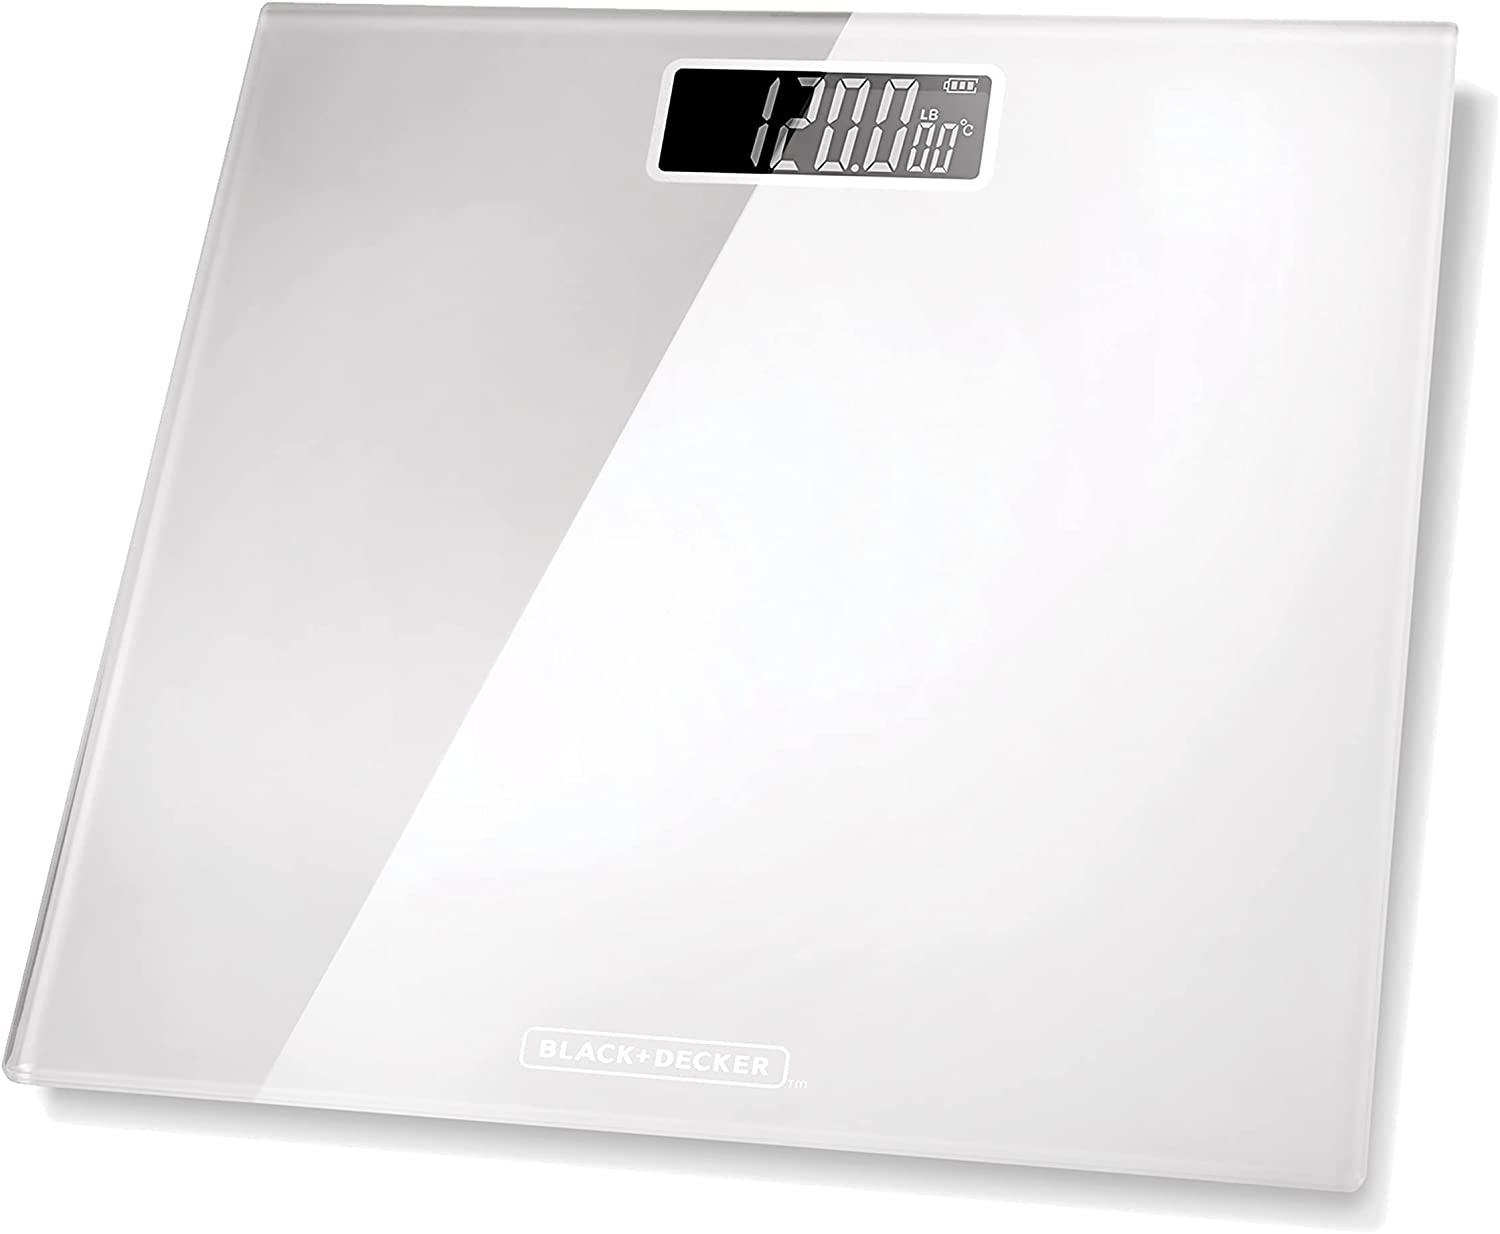 Black and Decker BD1199 Glass Electronic Bathroom Scales WHITE 